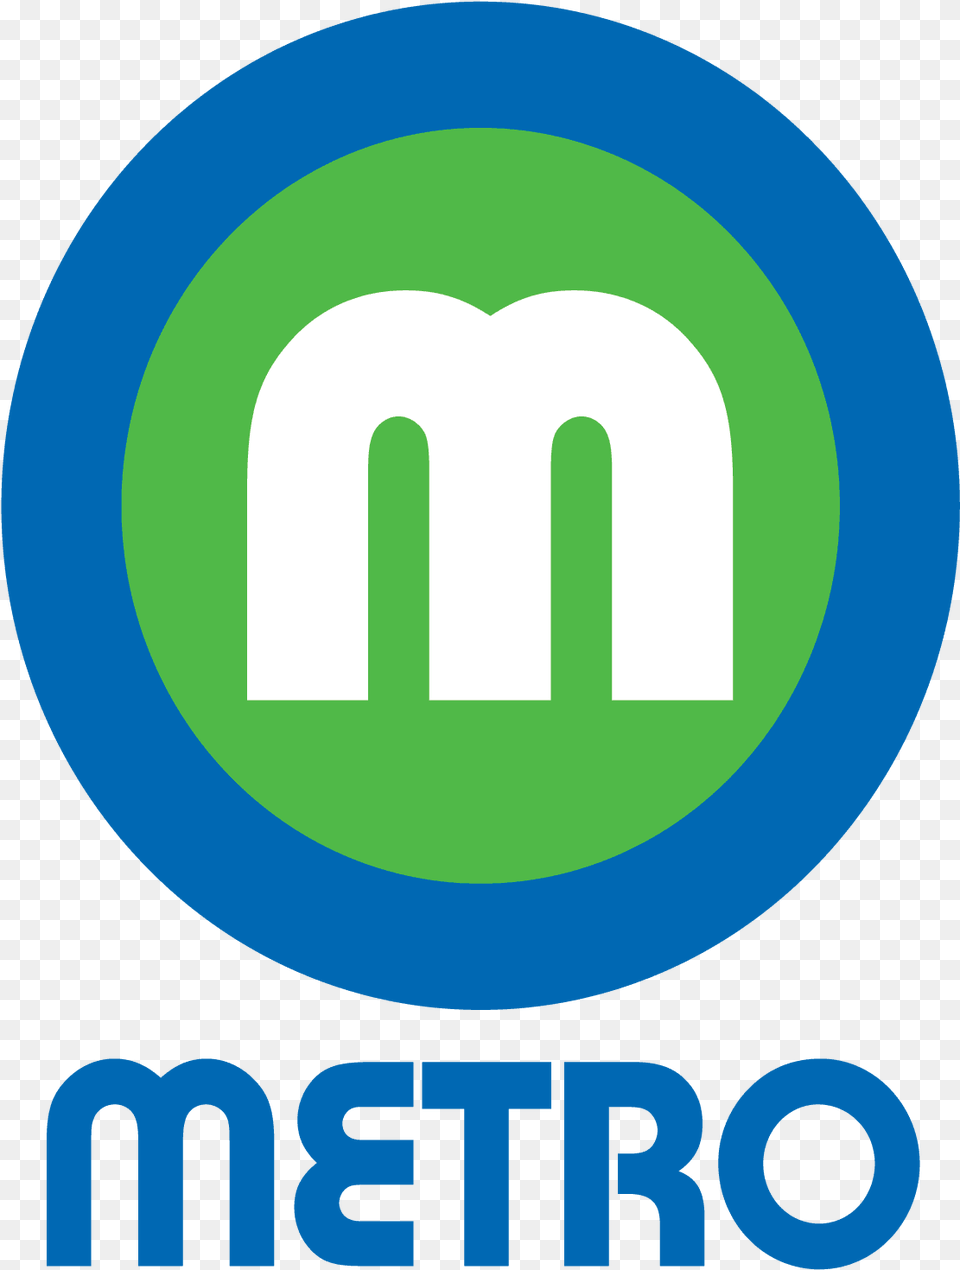 Download Thumbs Up Metro Logo Metro Moline Full Size Thousand Foot Krutch Welcome, Disk Png